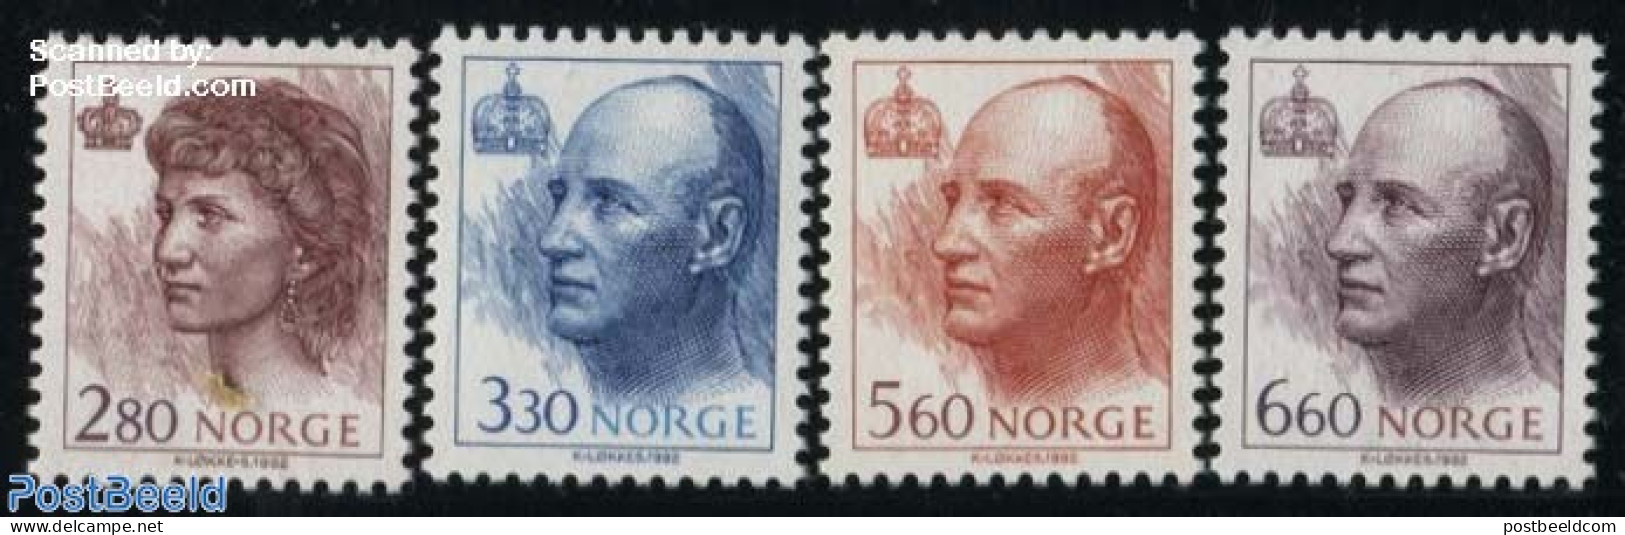 Norway 1992 Definitives 4v, Mint NH - Unused Stamps